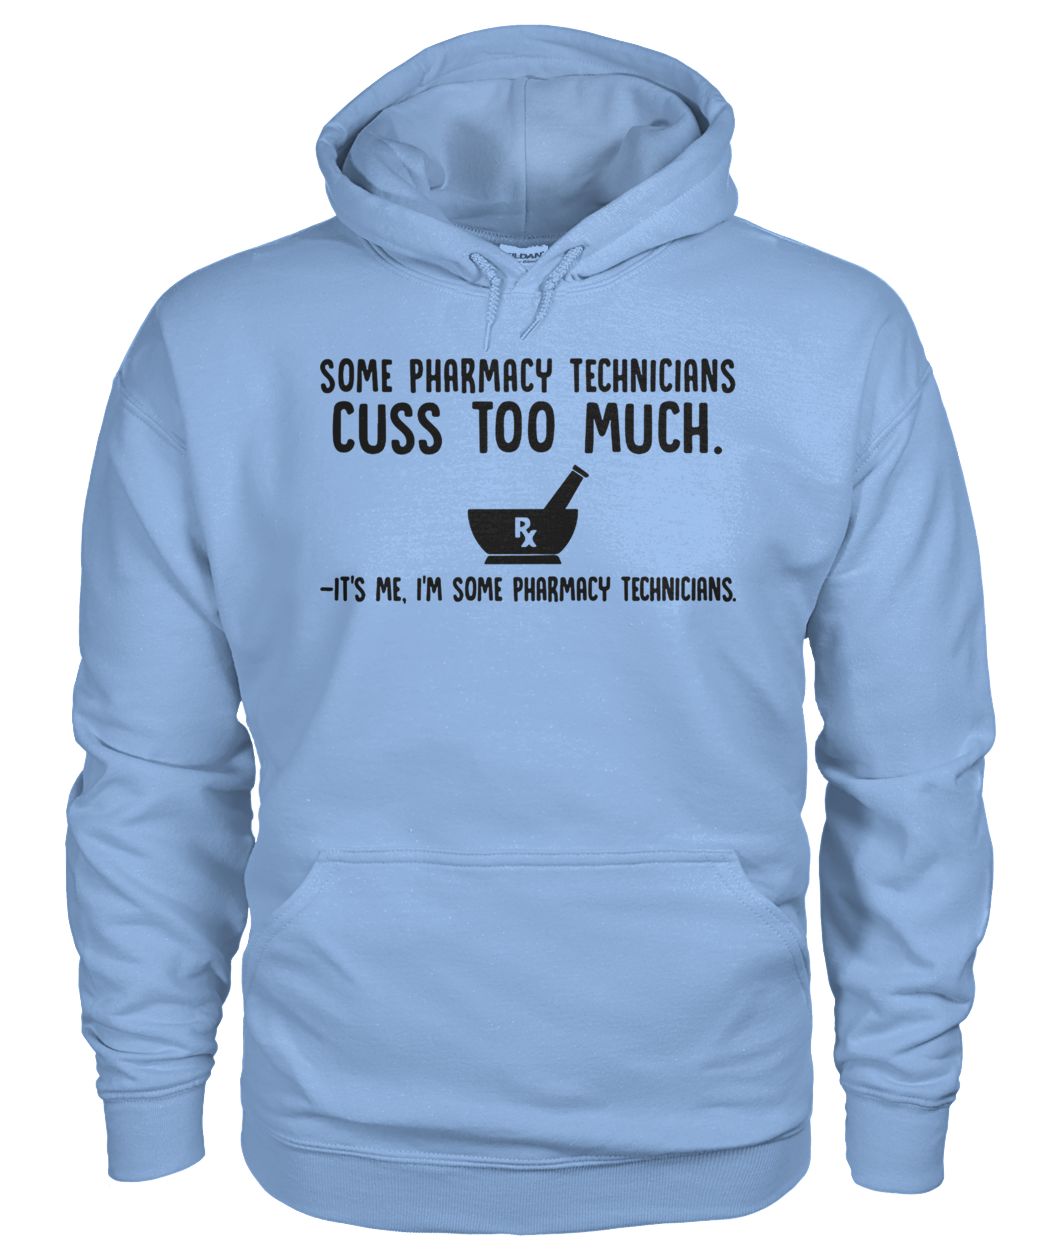 Some pharmacy technicians cuss too much it's me I'm some pharmacy technicians gildan hoodie